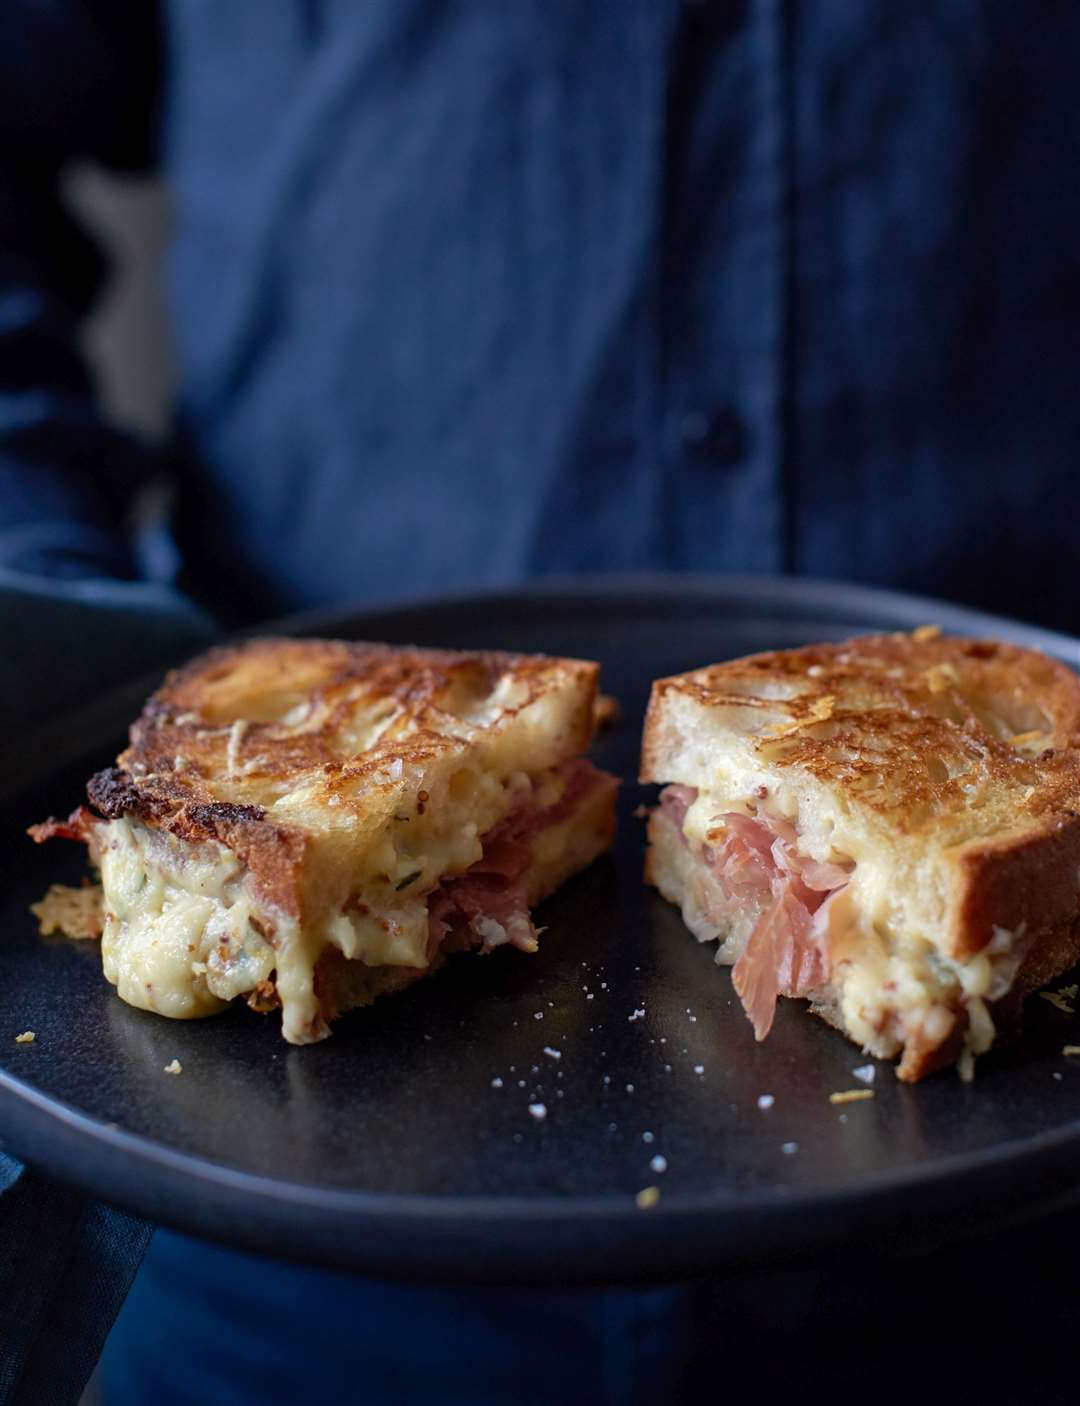 Marcus Wareing's croque monsieur. Picture: Susan Bell/PA